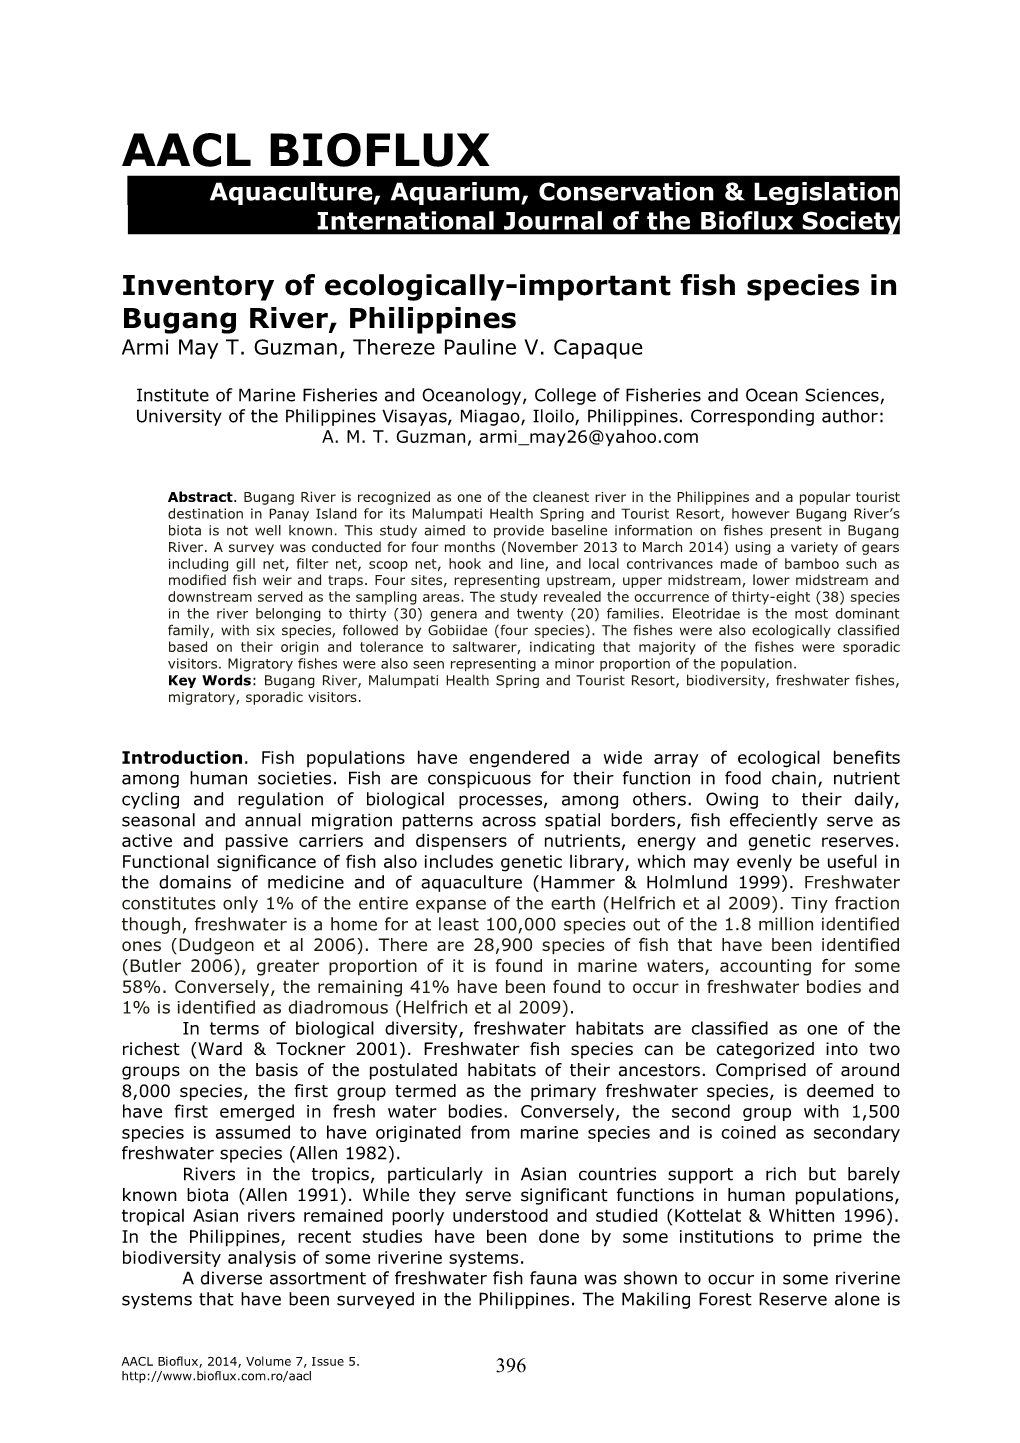 Inventory of Ecologically-Important Fish Species in Bugang River, Philippines Armi May T